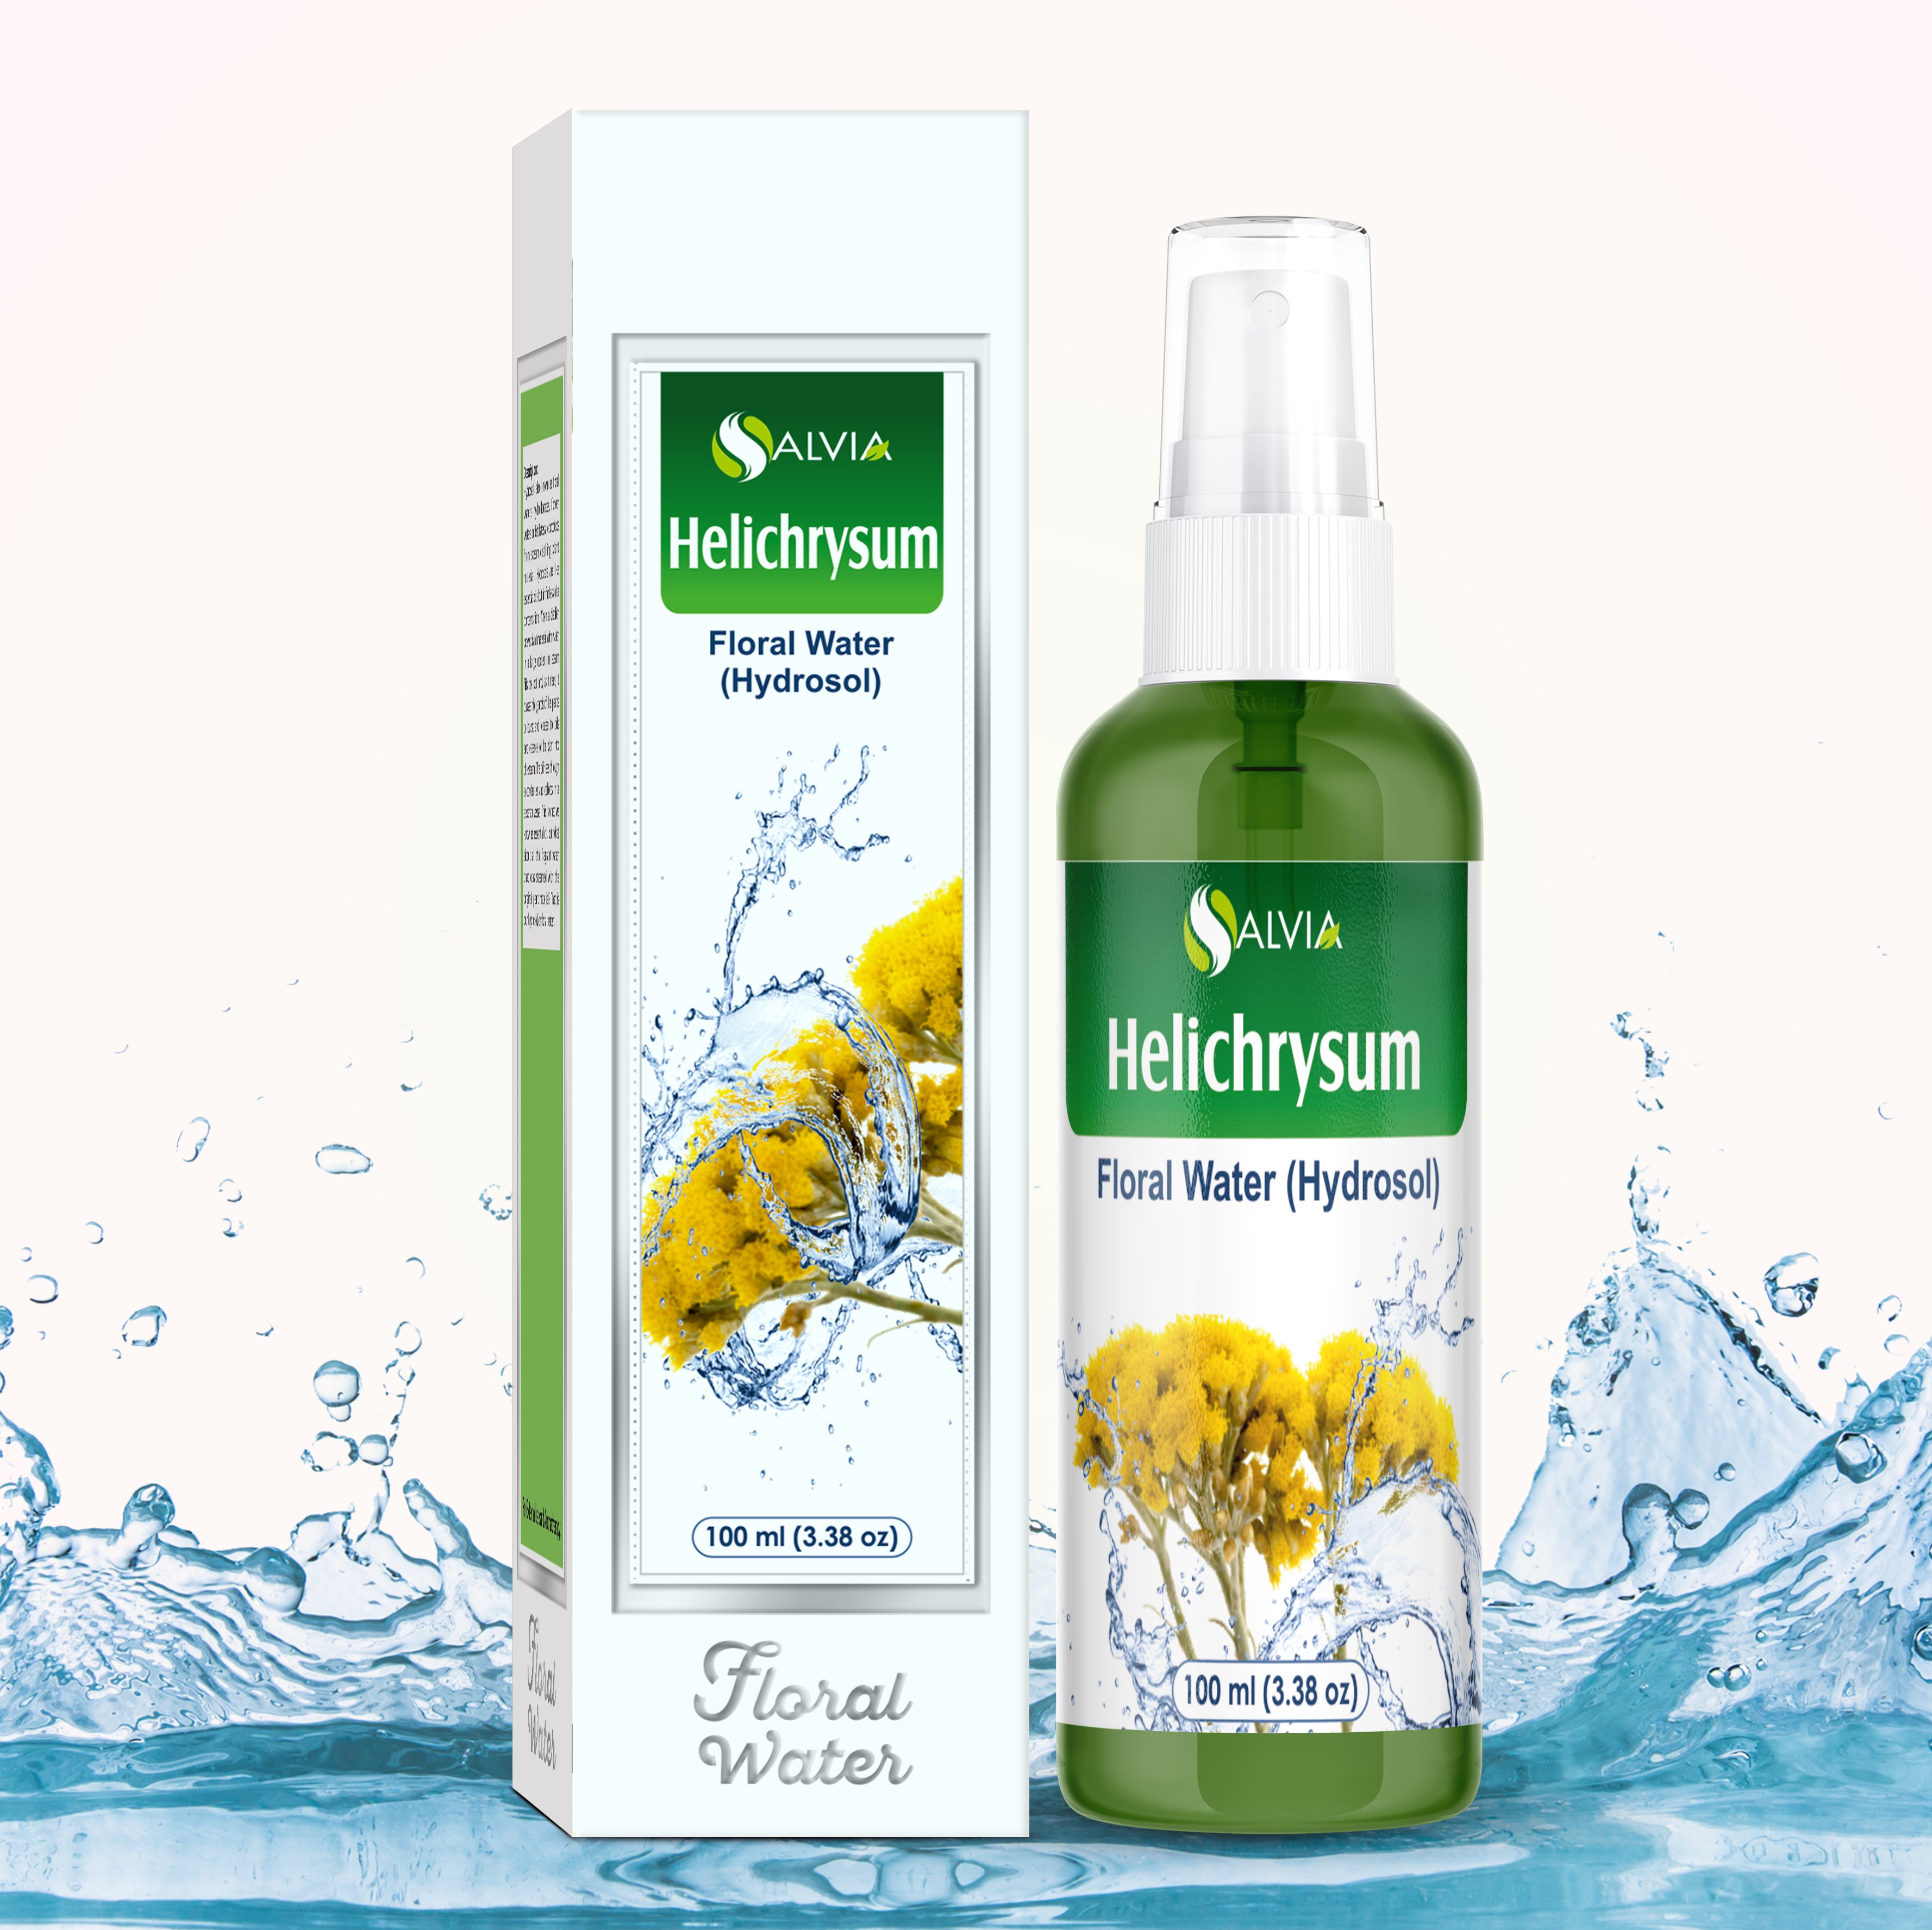 Salvia Floral Water 100 ml Helichrysum Floral Water